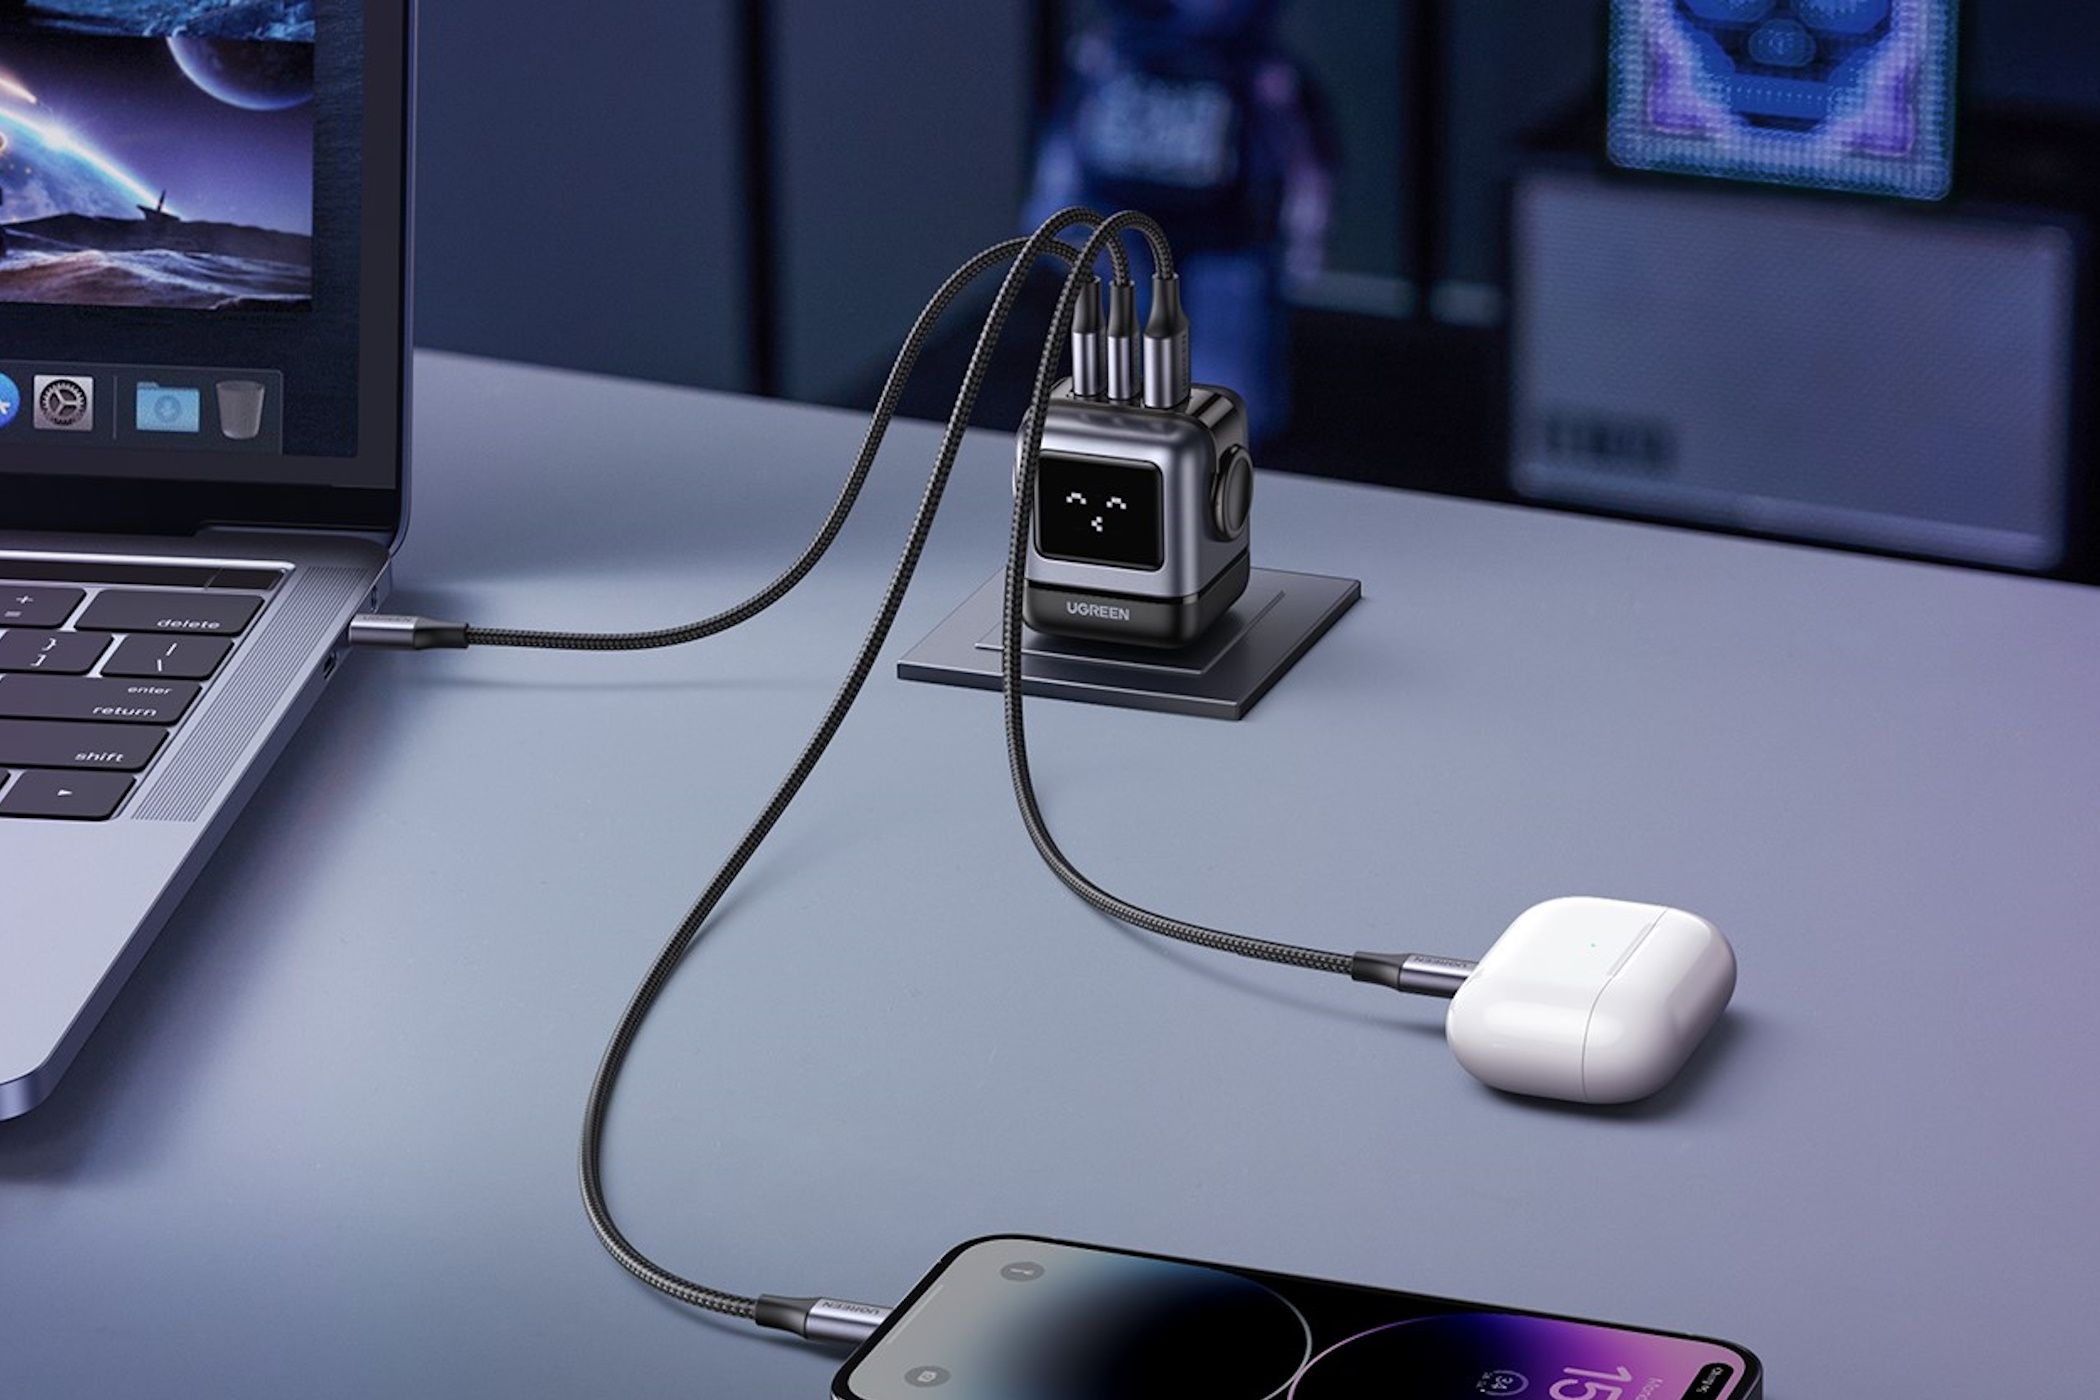 ugreen rg charger charging devices on table including iphone, macbook, and airpods